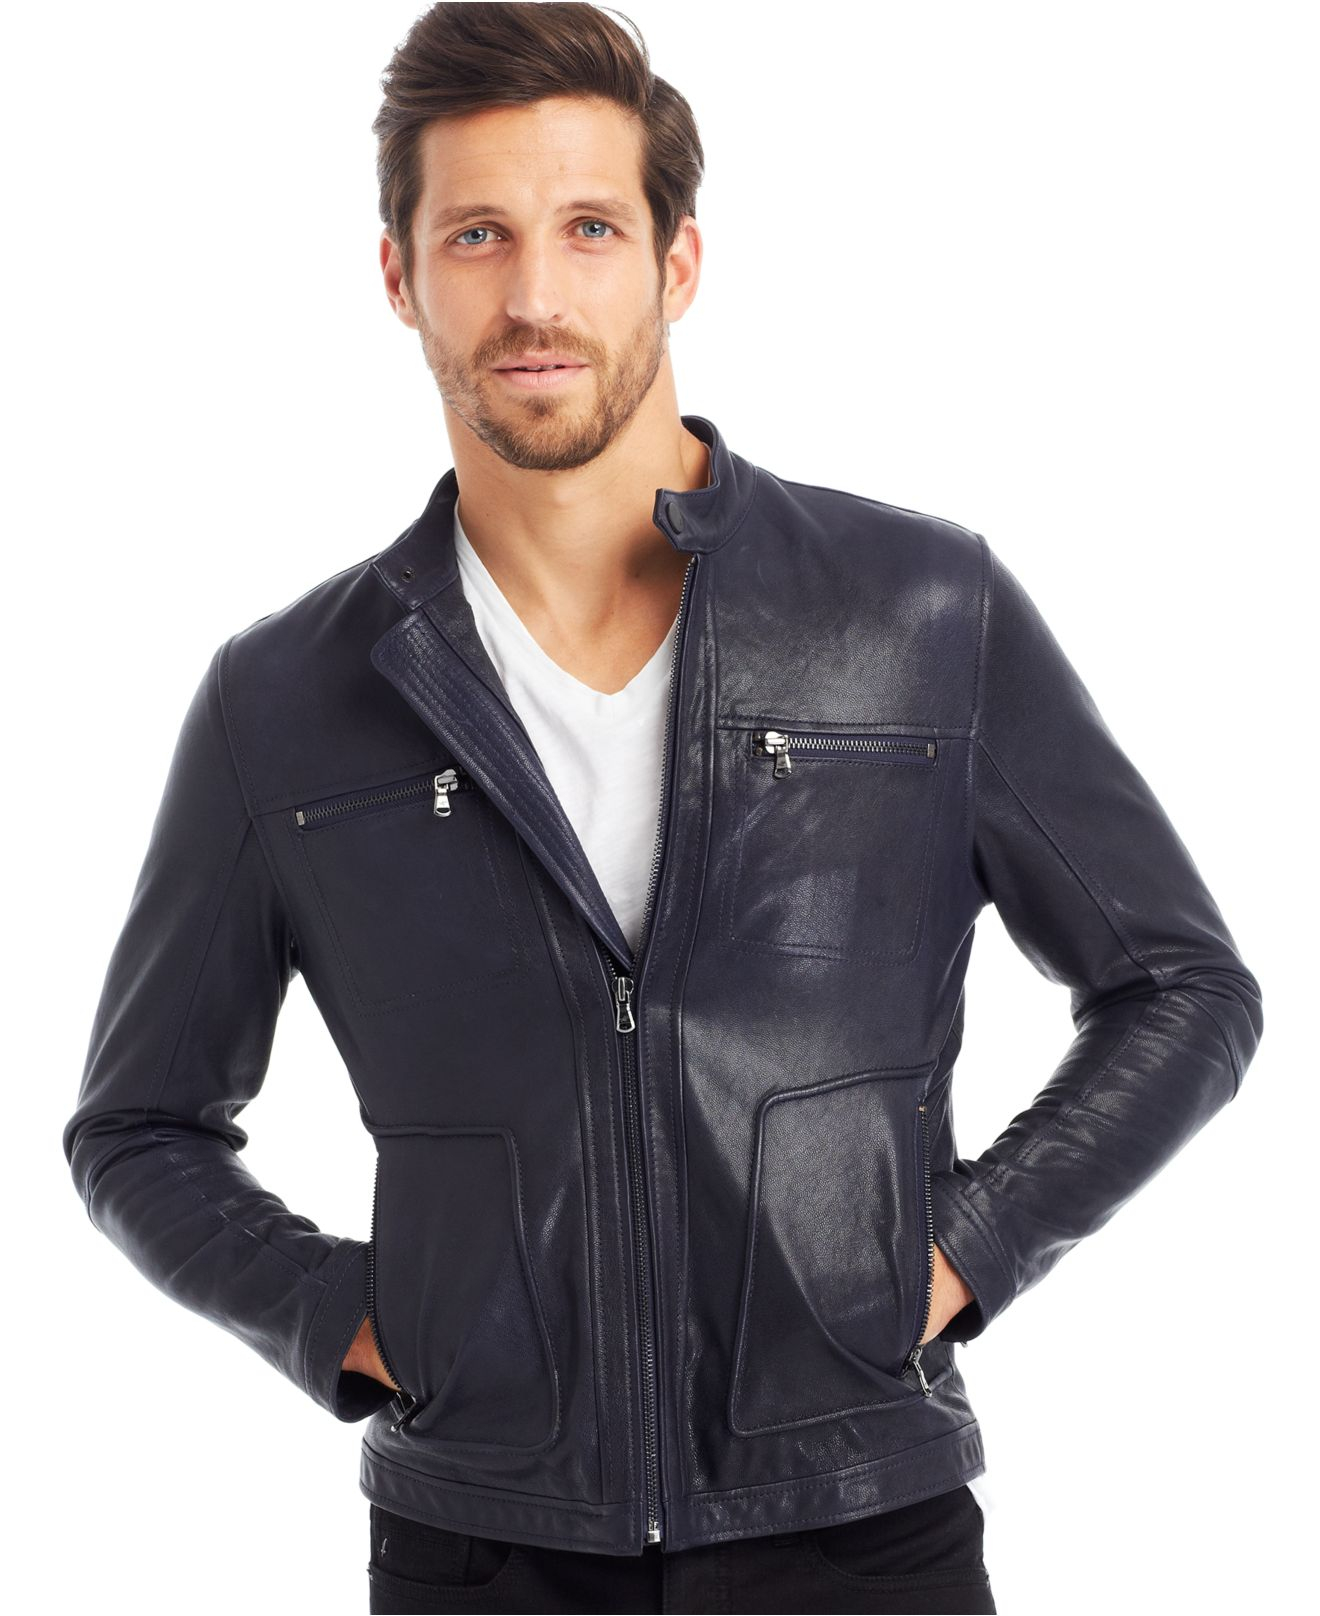 Lyst - Kenneth Cole Zip Pockets Leather Motorcycle Jacket in Blue for Men